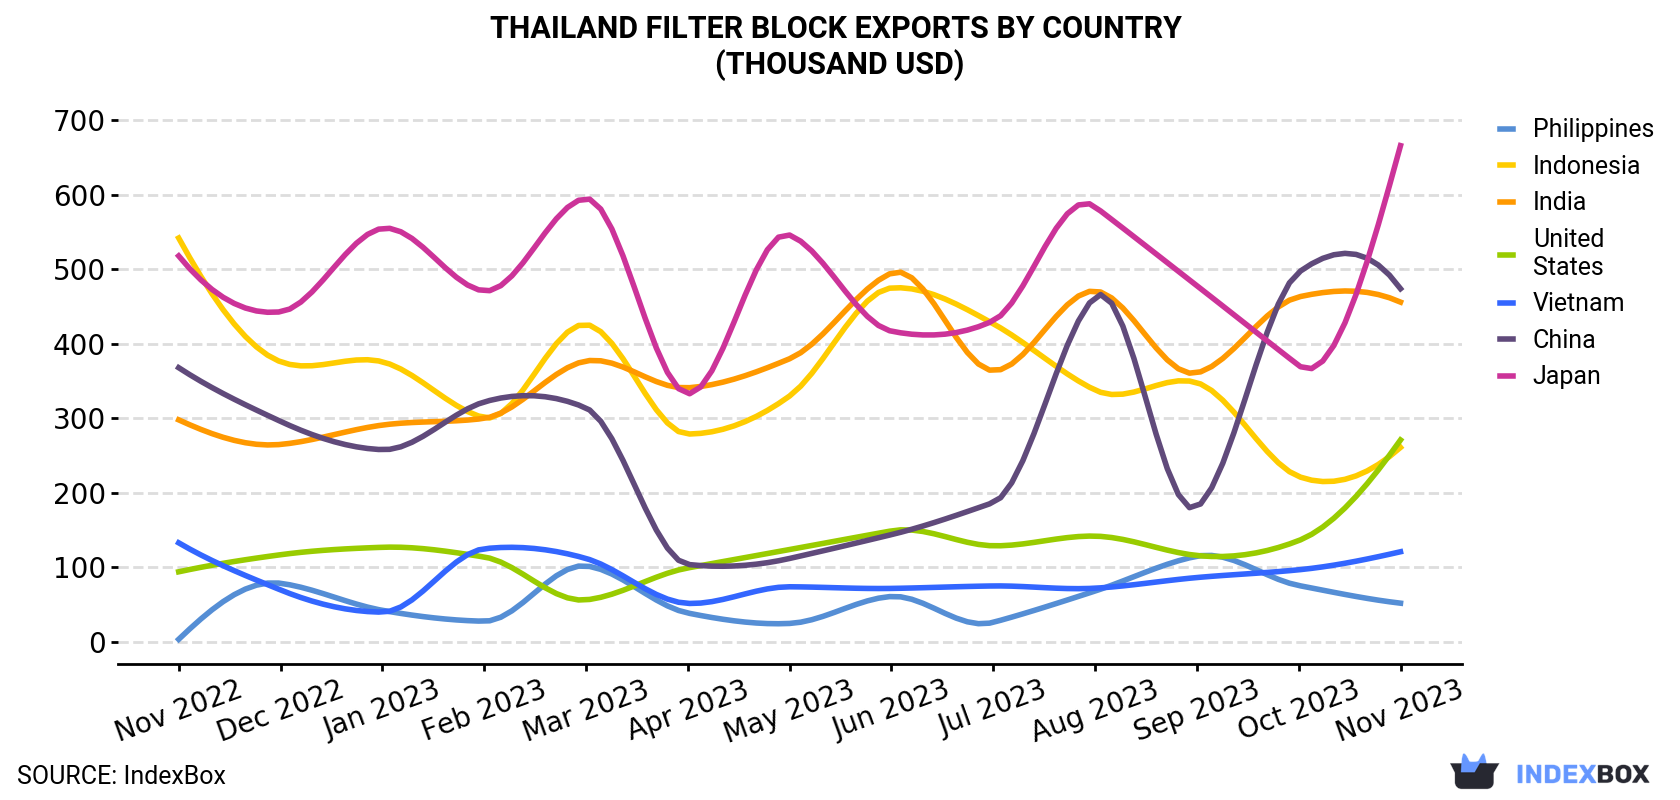 Thailand Filter Block Exports By Country (Thousand USD)